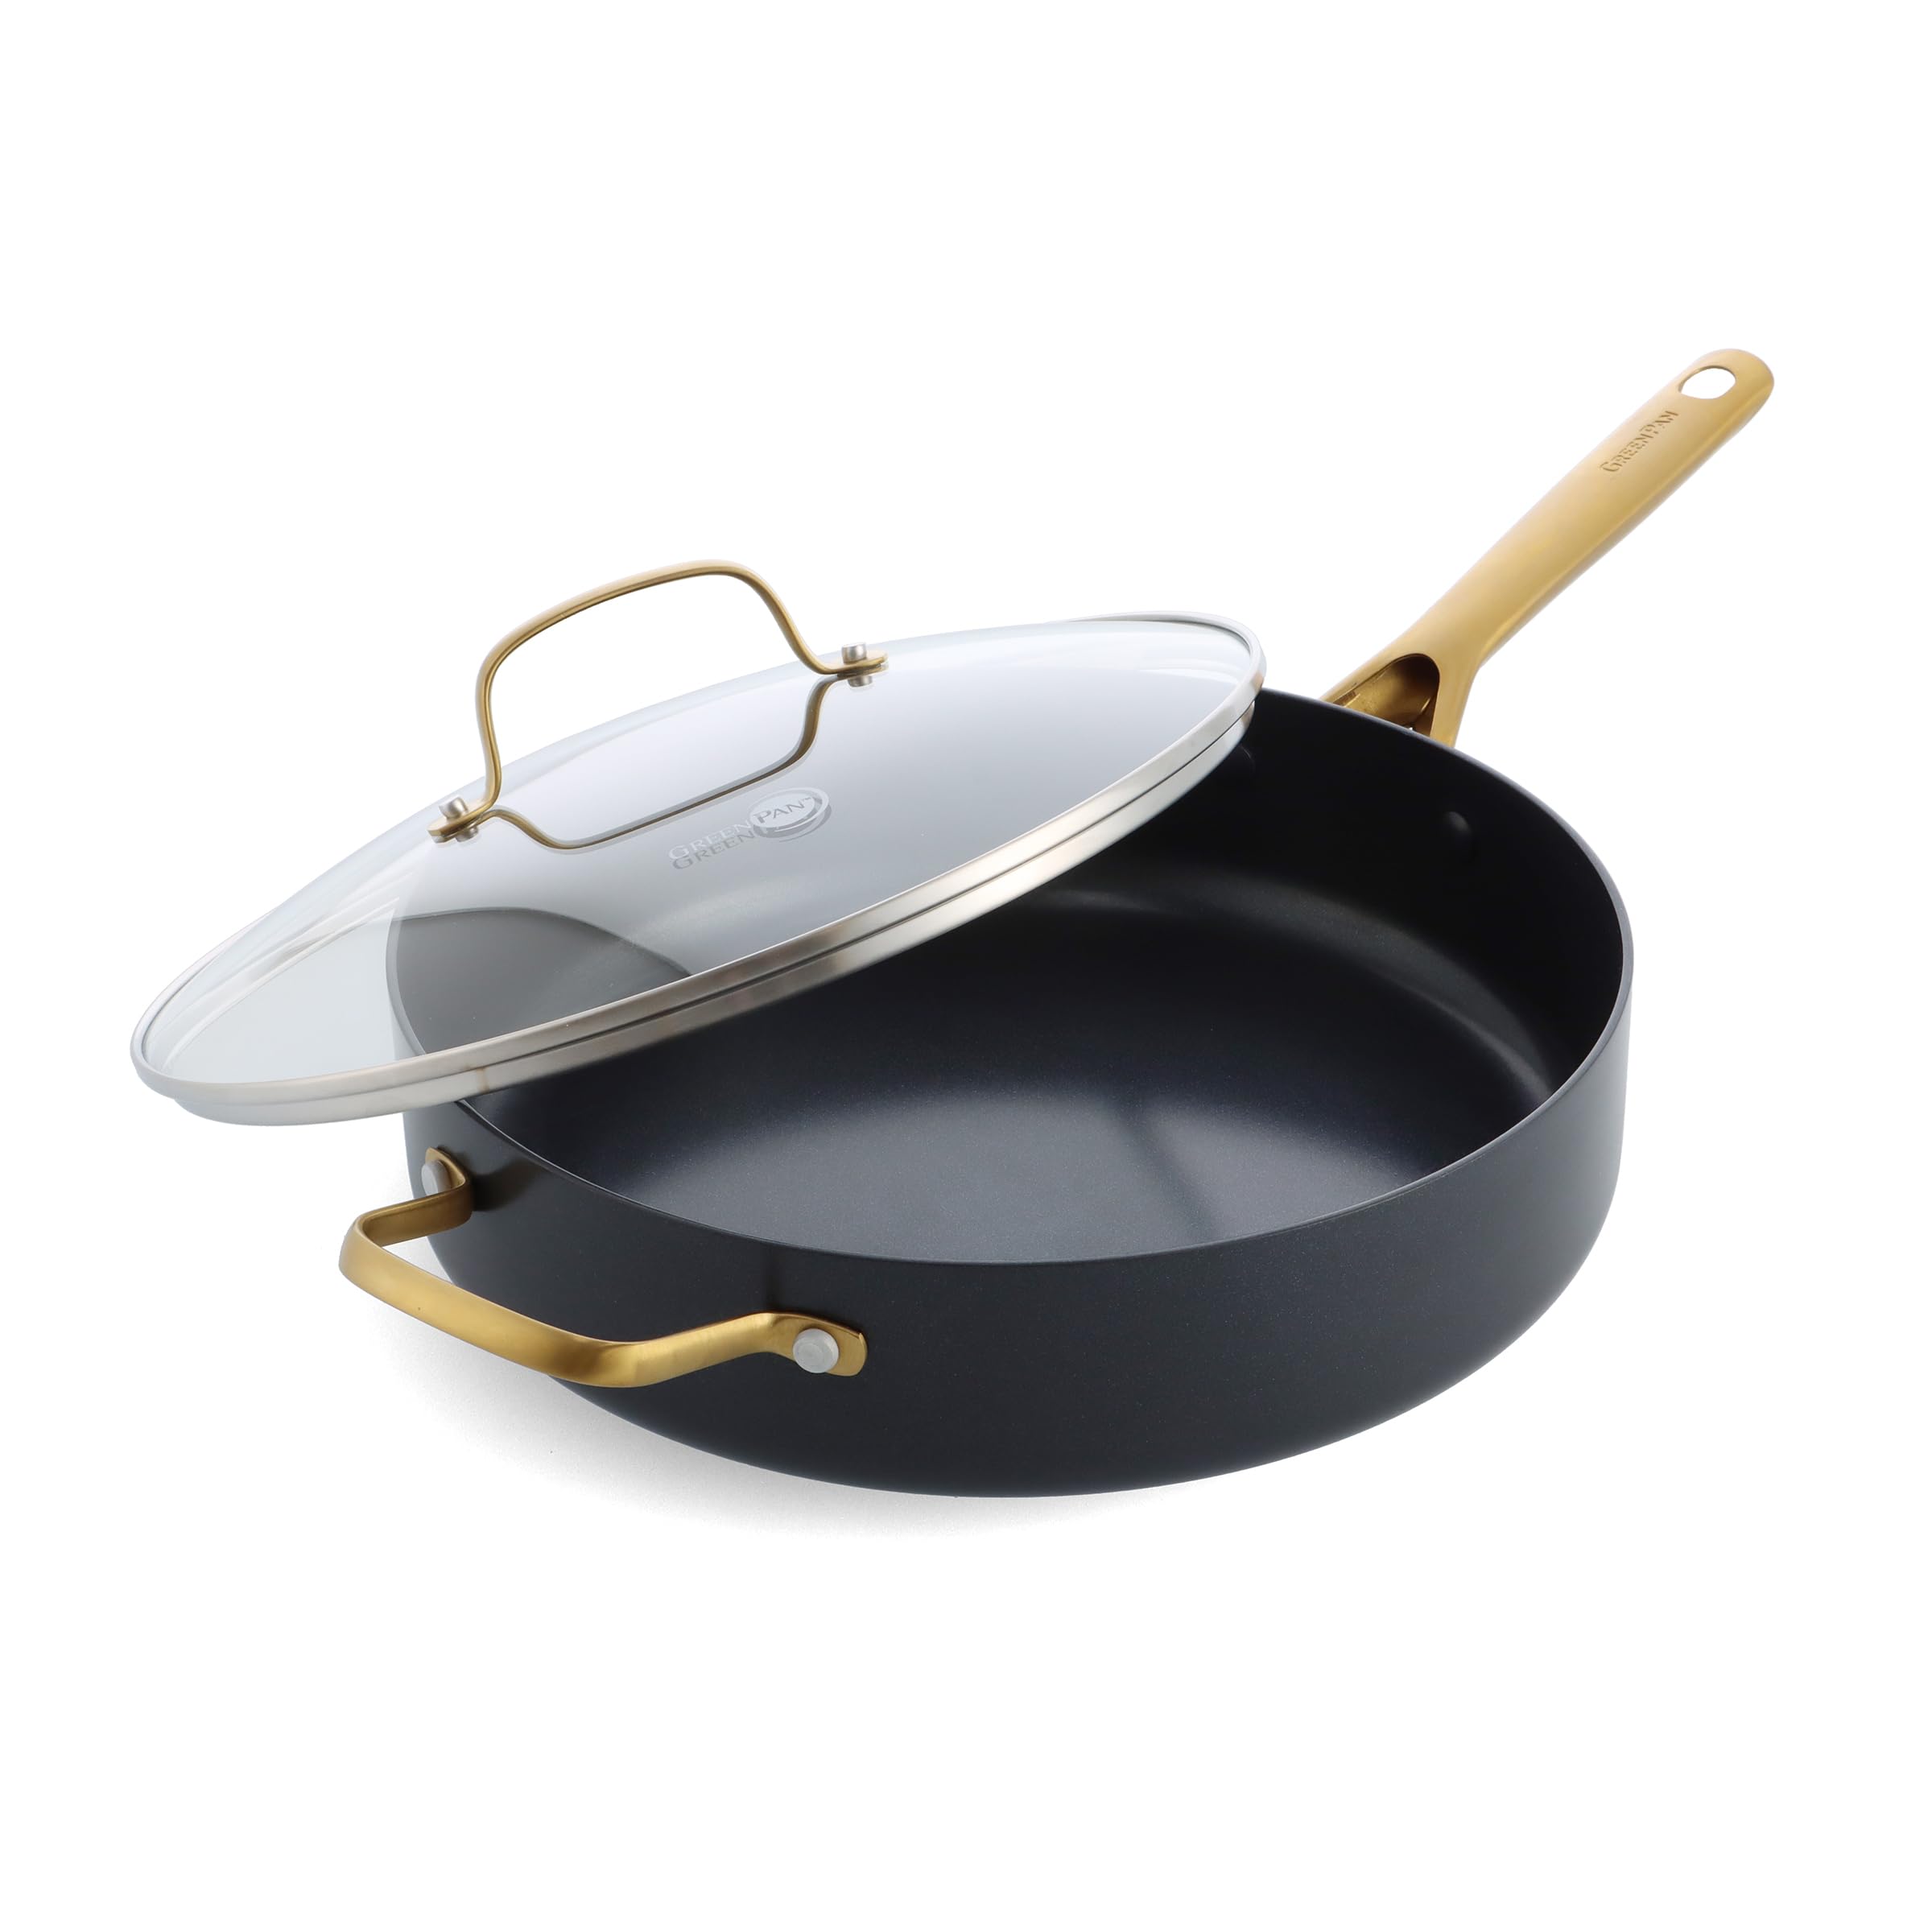 GreenPan Deco Hard Anodized Healthy Ceramic Nonstick 12” Saute Pan with Lid, Gold-Tone Stainless Steel Handle, Durable, Scratch Resistant, Dishwasher & Oven Safe, PFAS-Free, Black